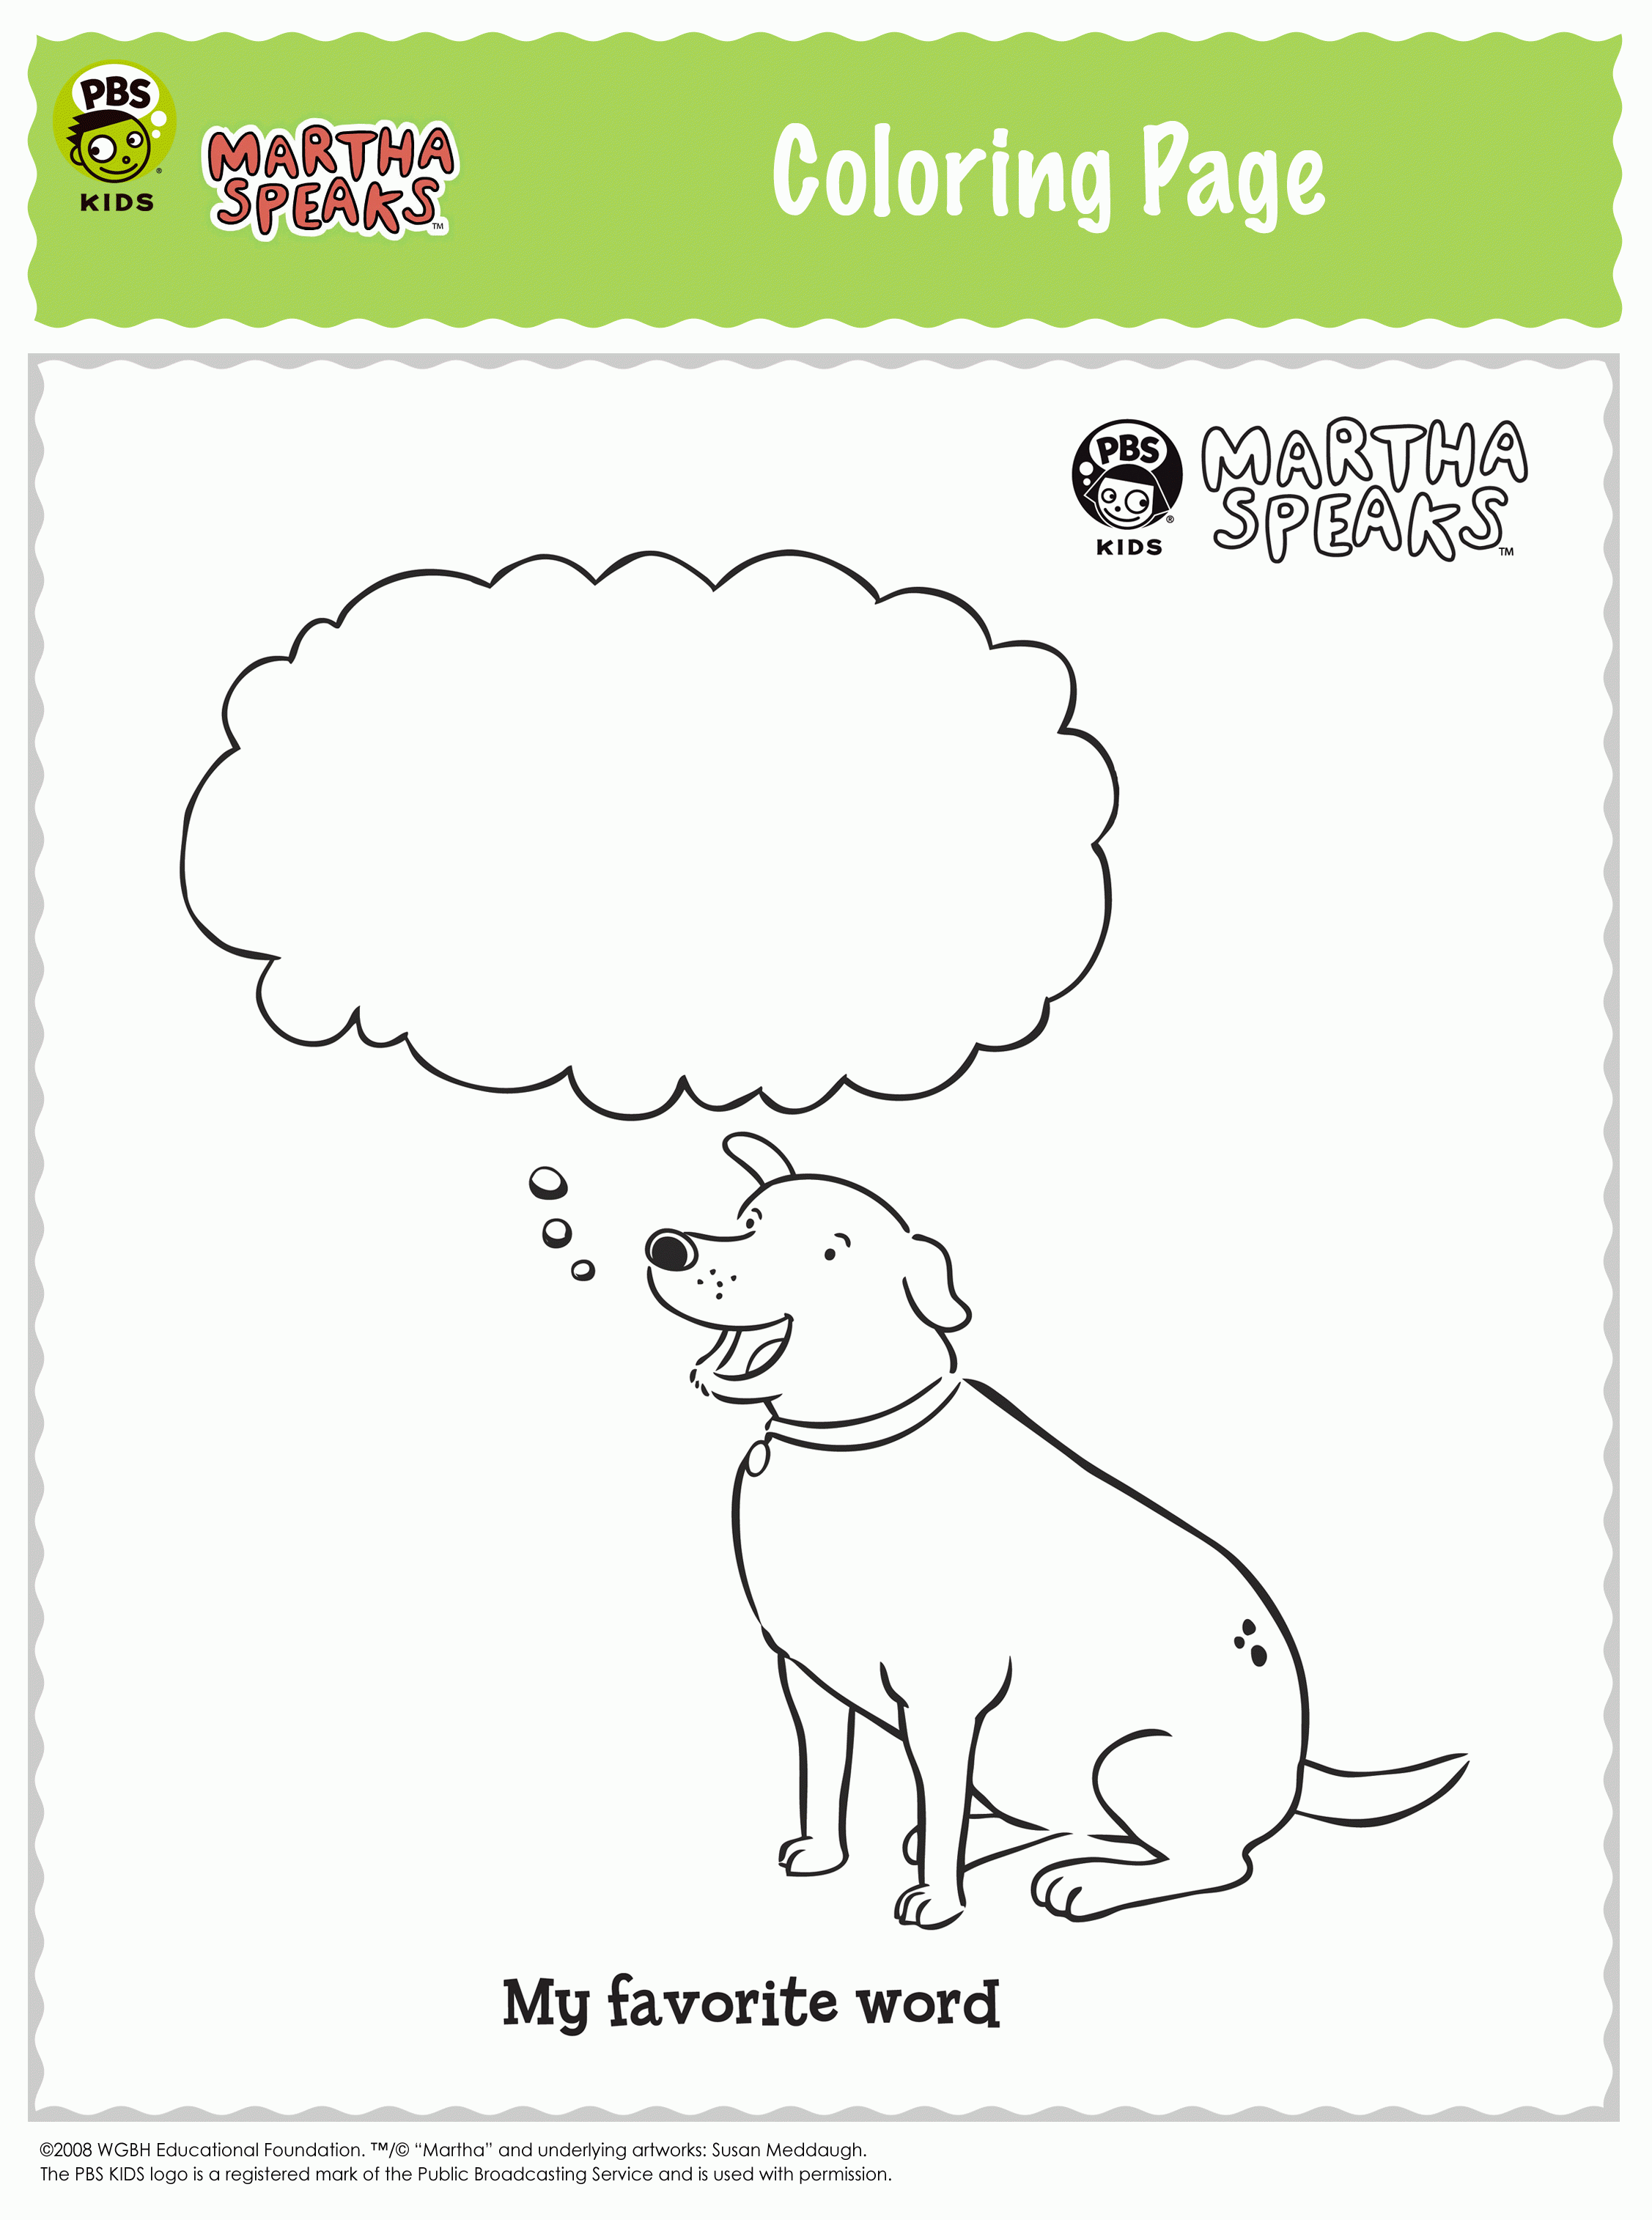 Martha Speaks Coloring Page